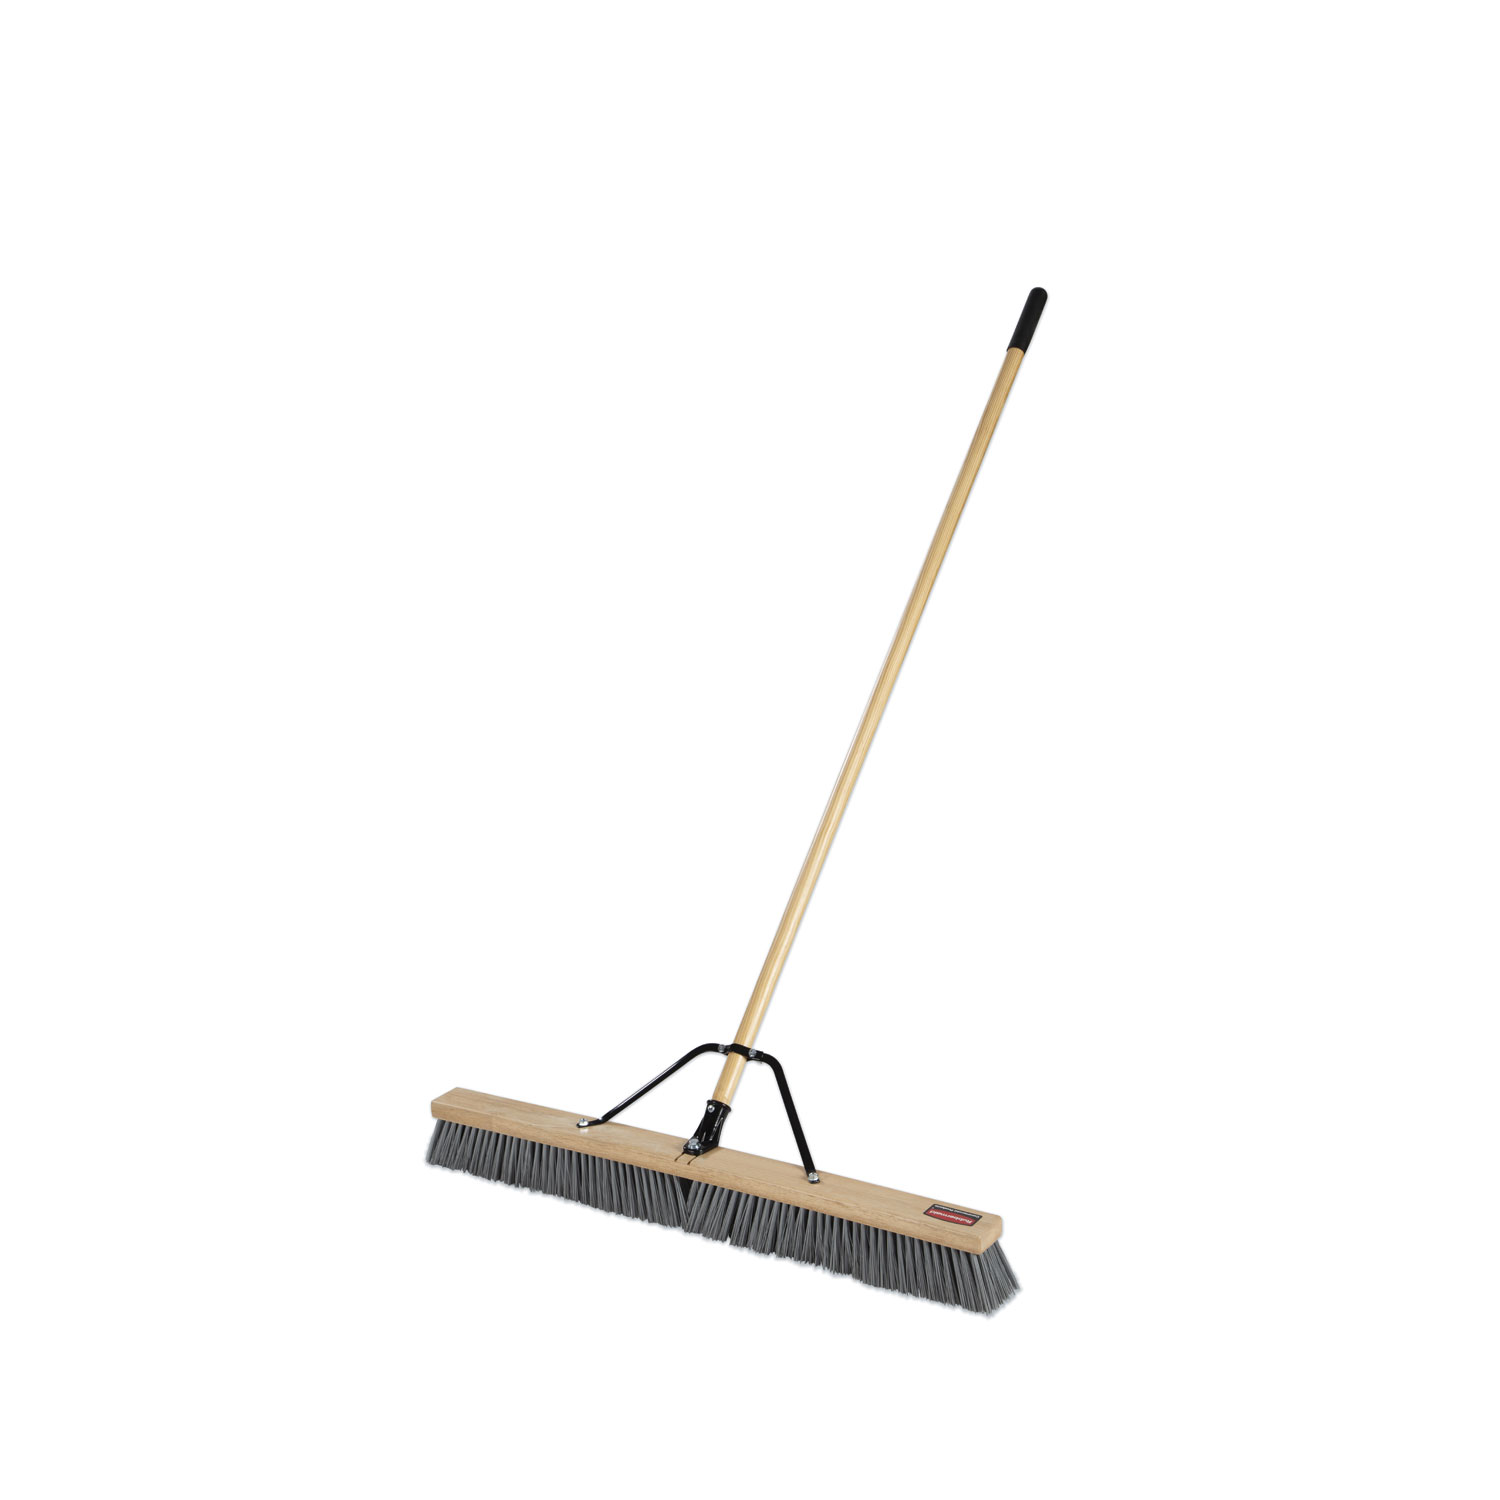  Rubbermaid Commercial 2040044 Push Brooms, 36 Brush, PP Bristles, For Rough Floor Surfaces, 62 Wood Handle, Natural (RCP2040044) 